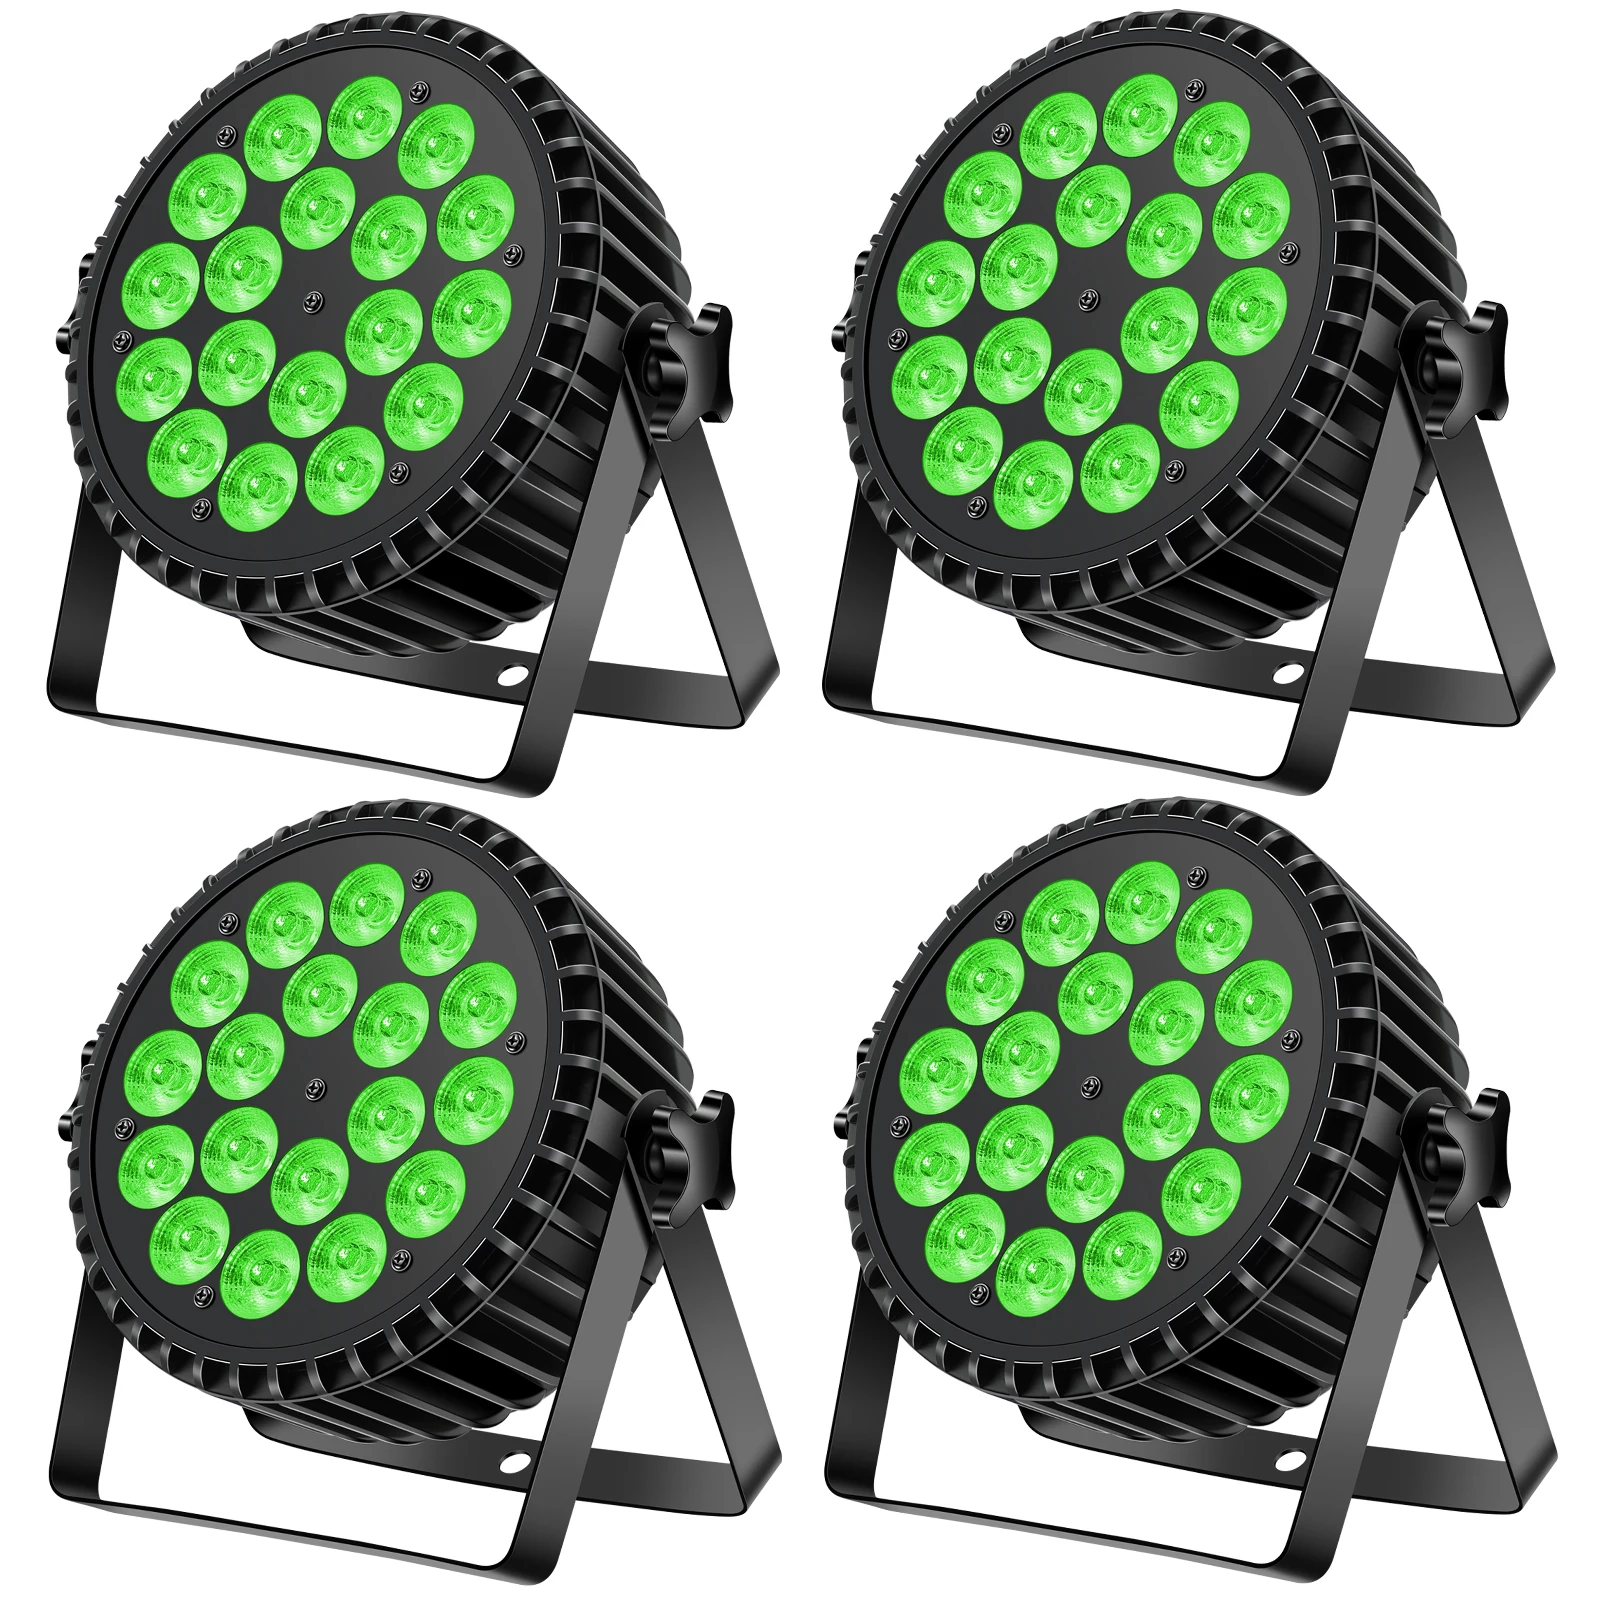 

200W 4PCS 18 * 10W 4 IN 1 RGBW LED HOLDLAMP Par DMX Stage Effect Light Infinite Mixing and Rainbow Effect